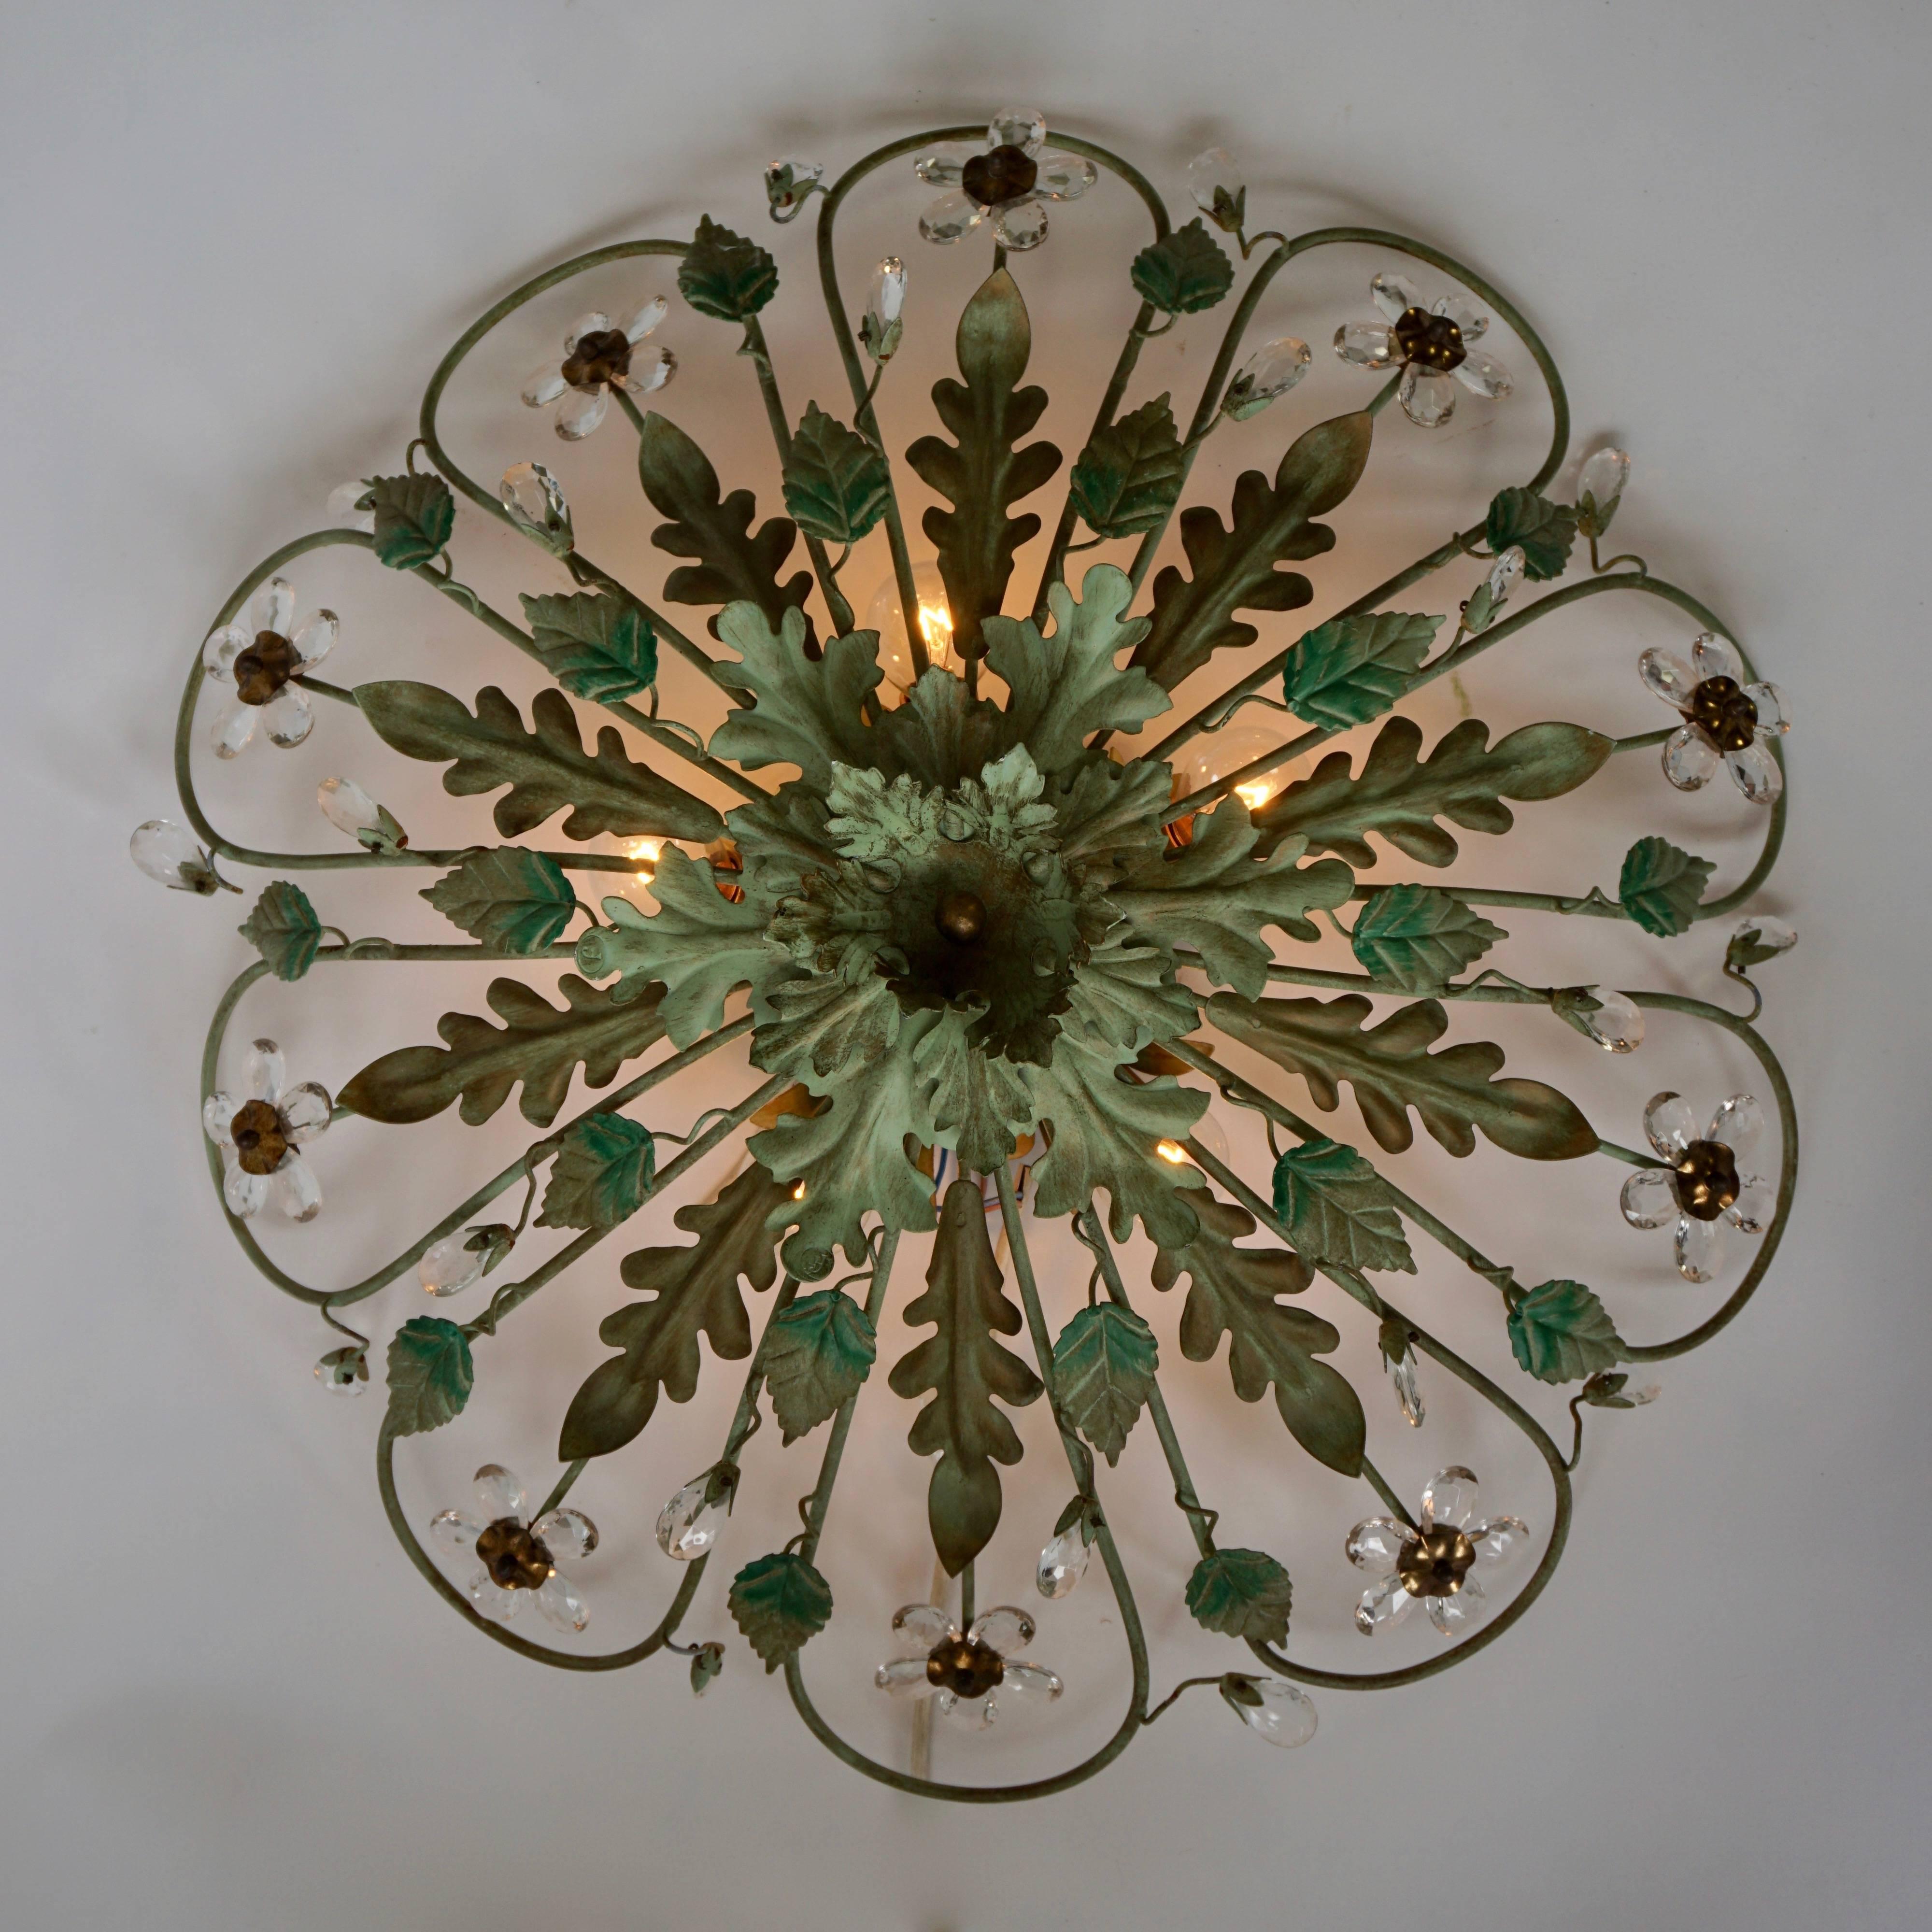 One painted metal flush mount light with glass flowers. The light creates a warm and cozy light with a distinct light right underneath the shade. The lamp features five lights source of max 60W.